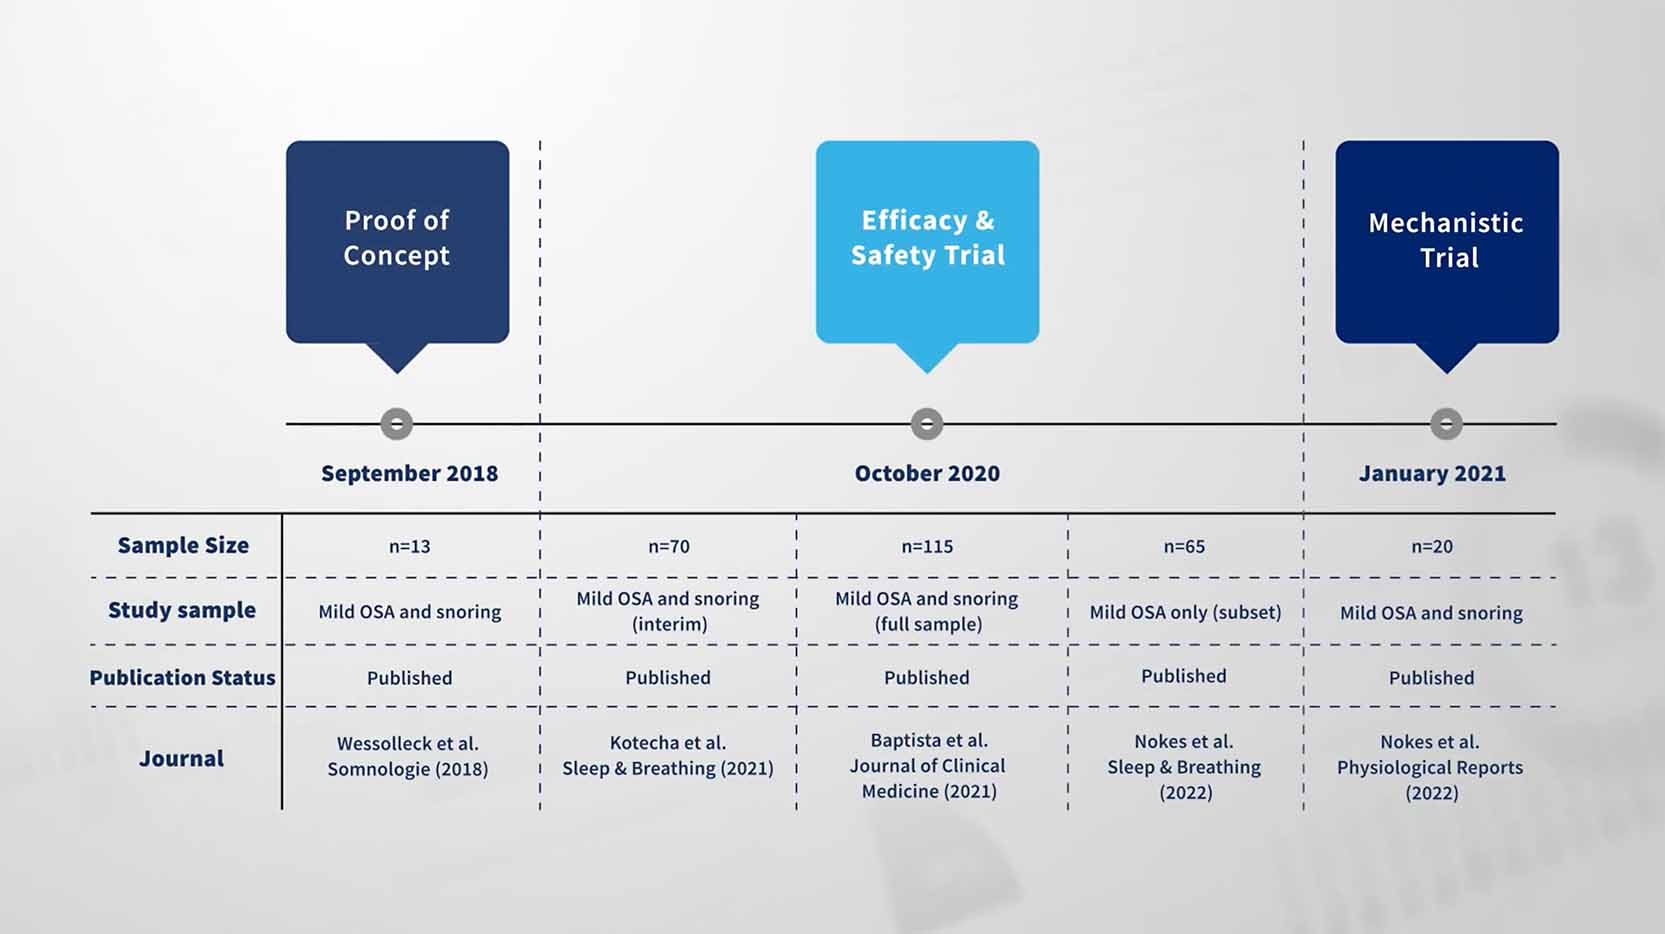 Timeline of clinical trials and evidence dating from September 2018 to January 2021